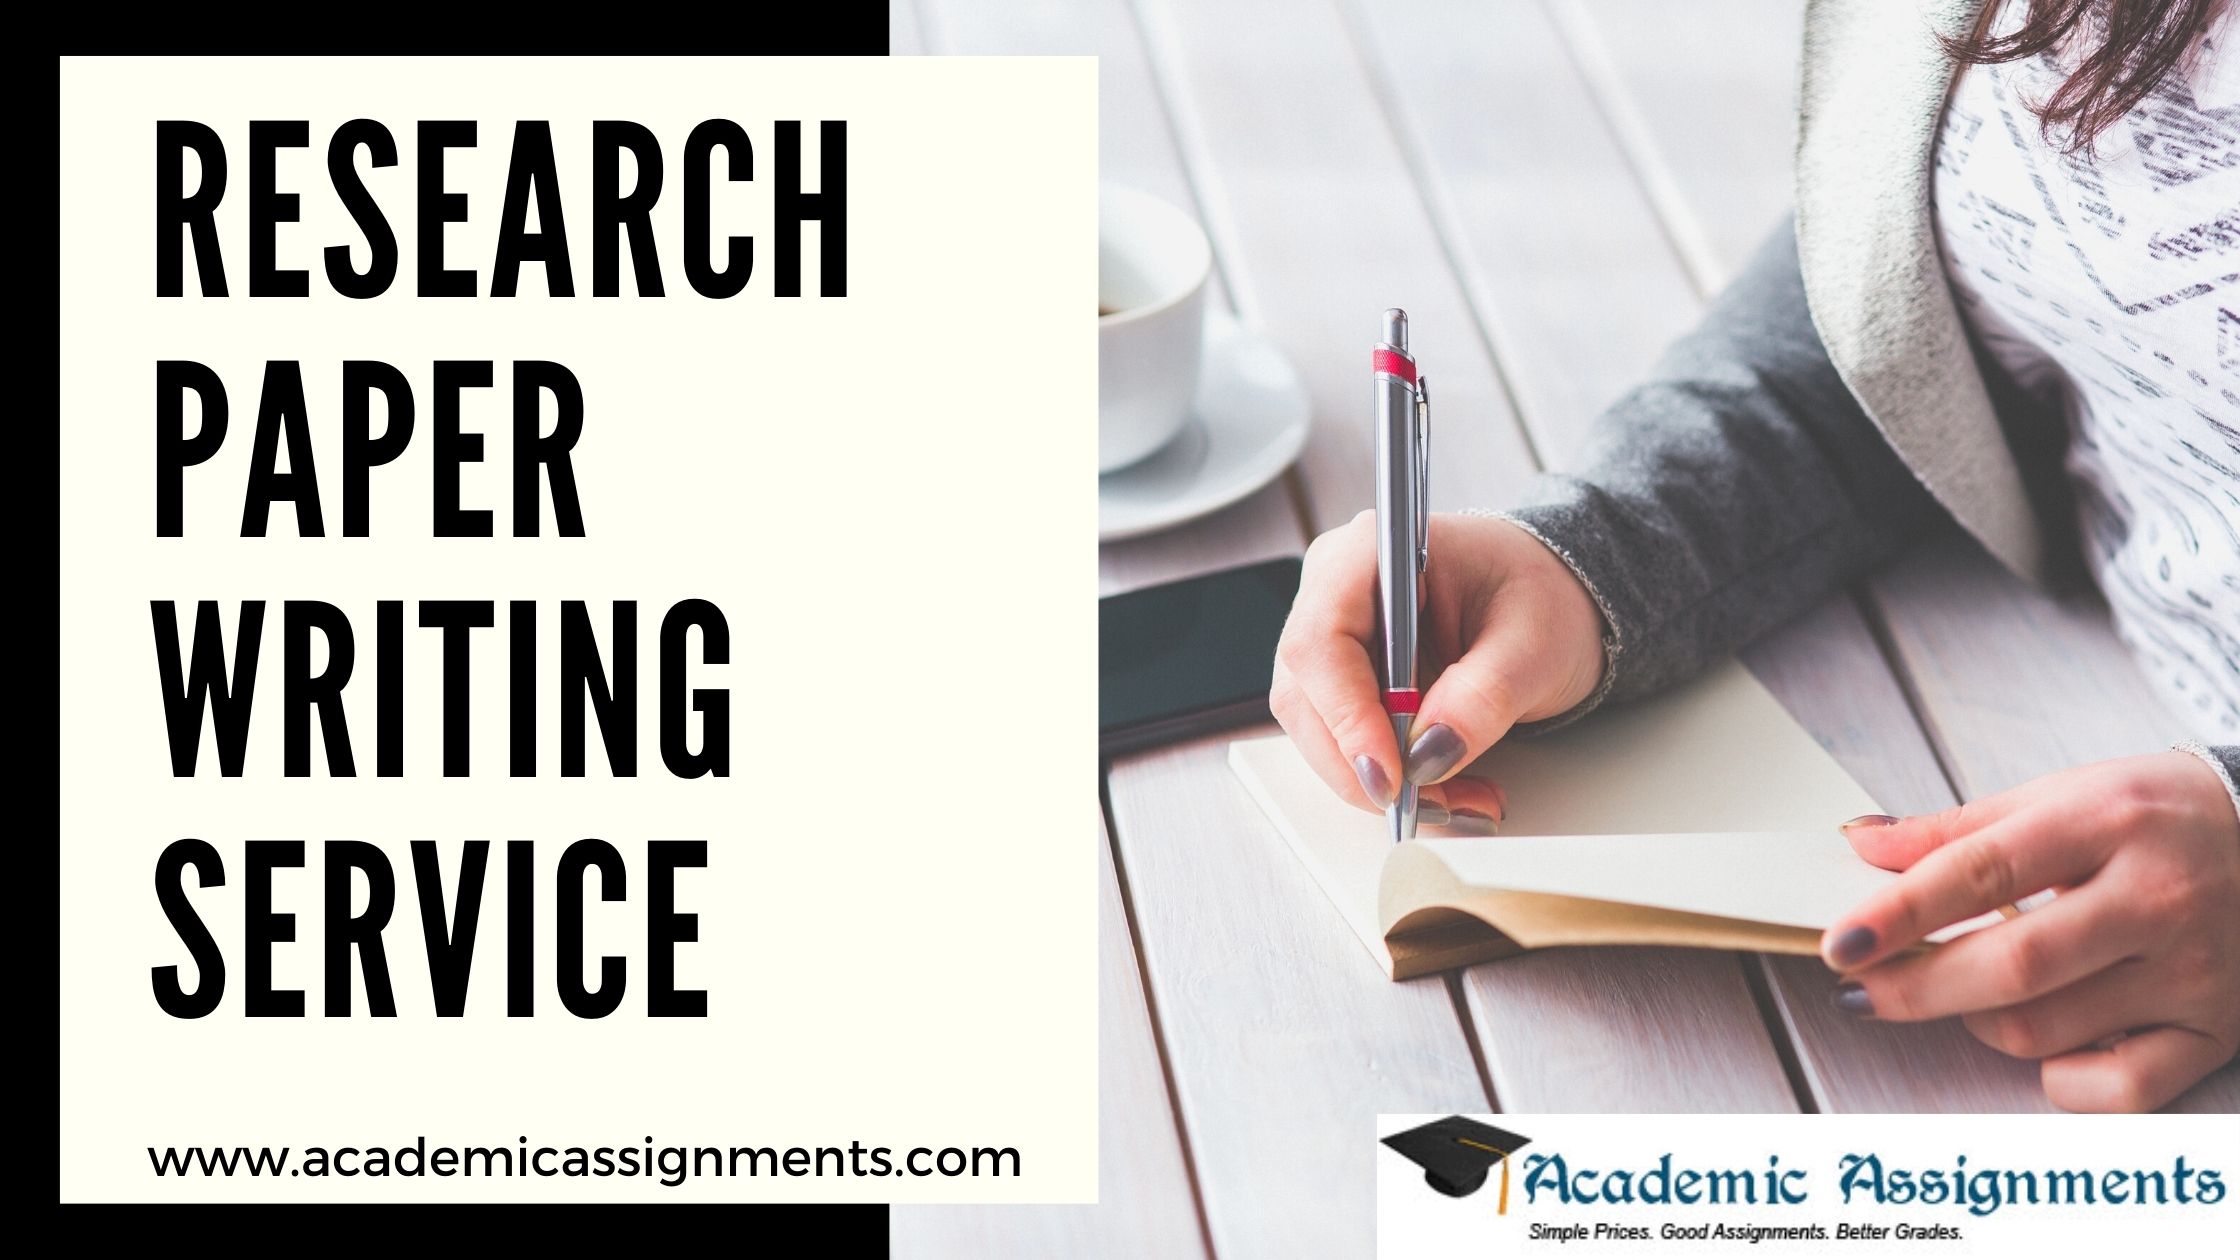 research paper writing services near me